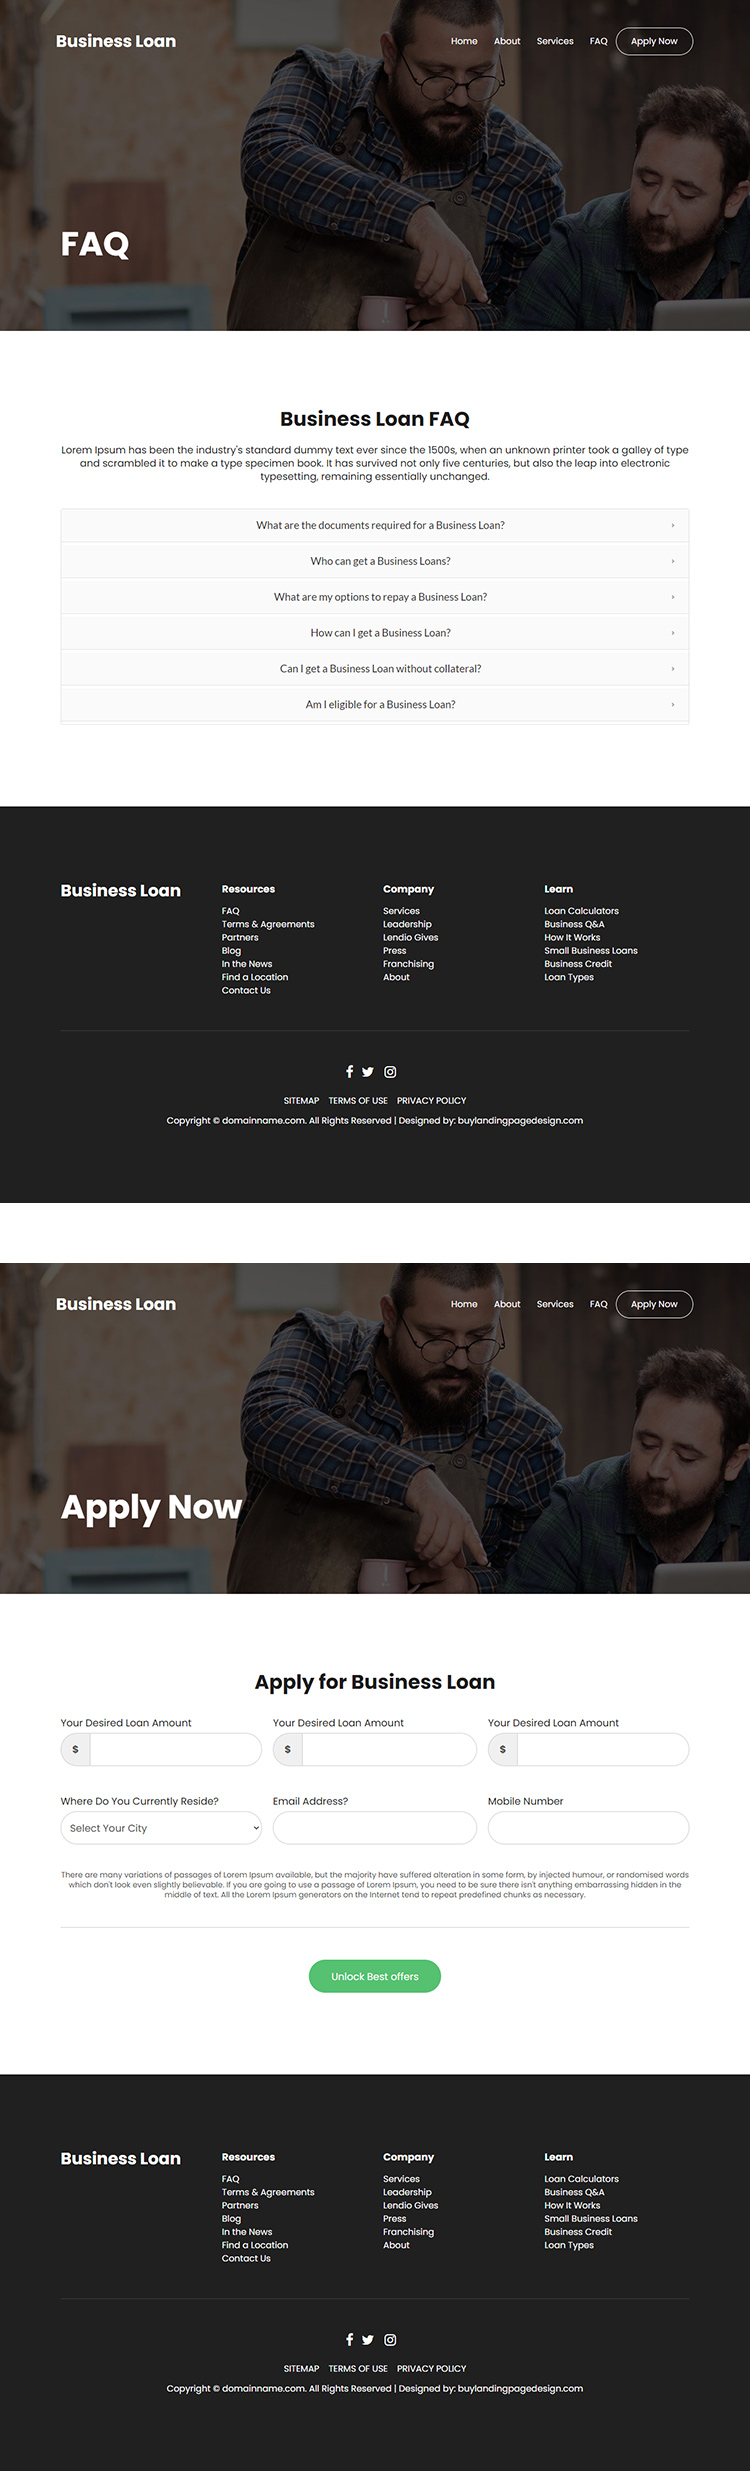 small business funding bootstrap website design